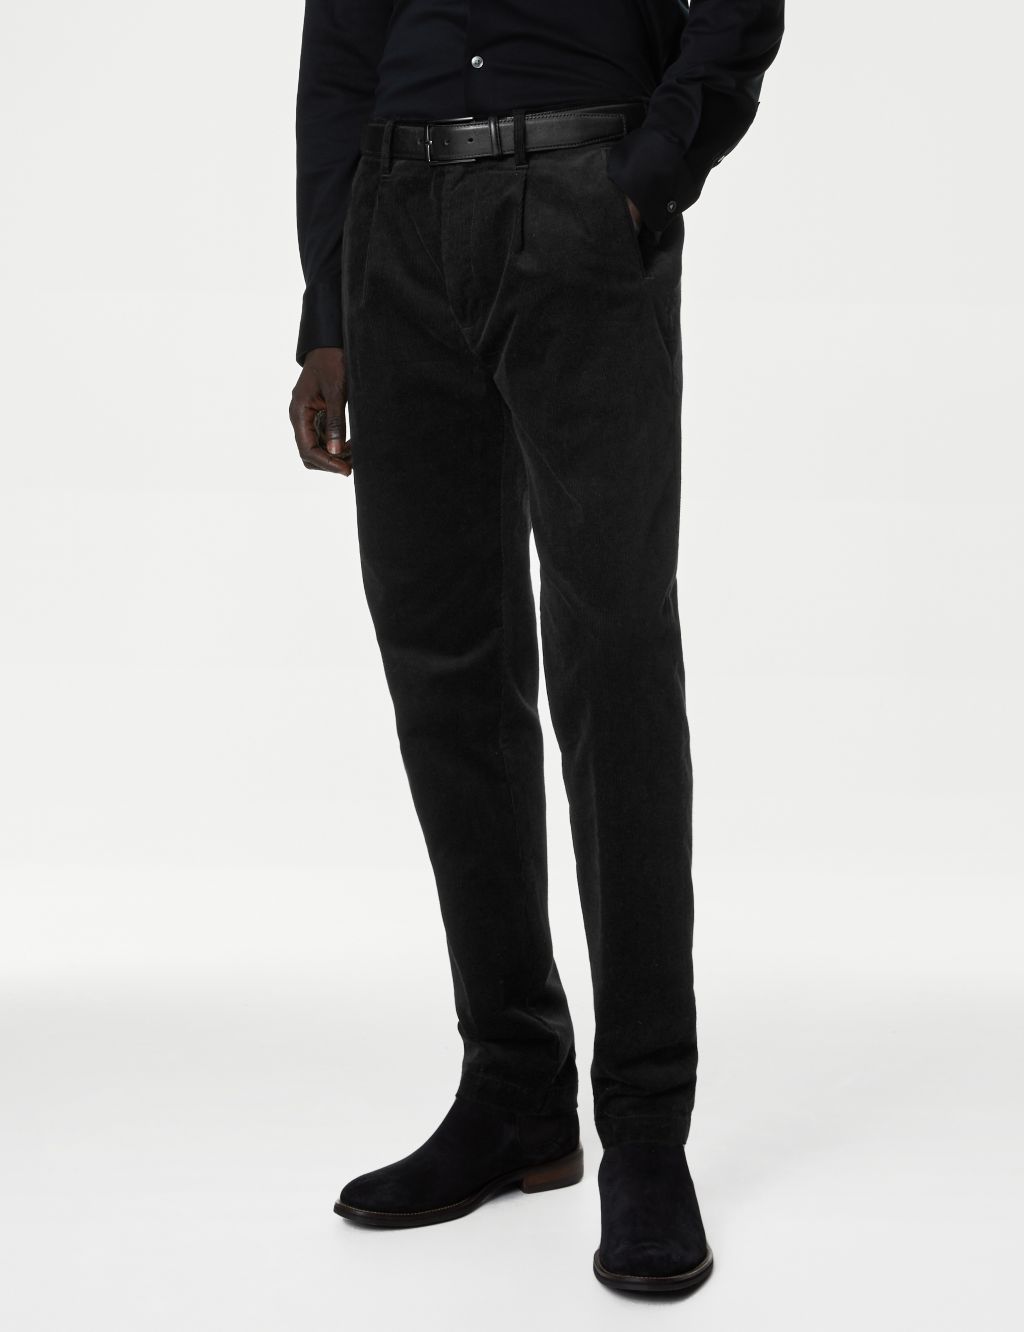 Tapered Fit Corduroy Single Pleat Trousers image 3